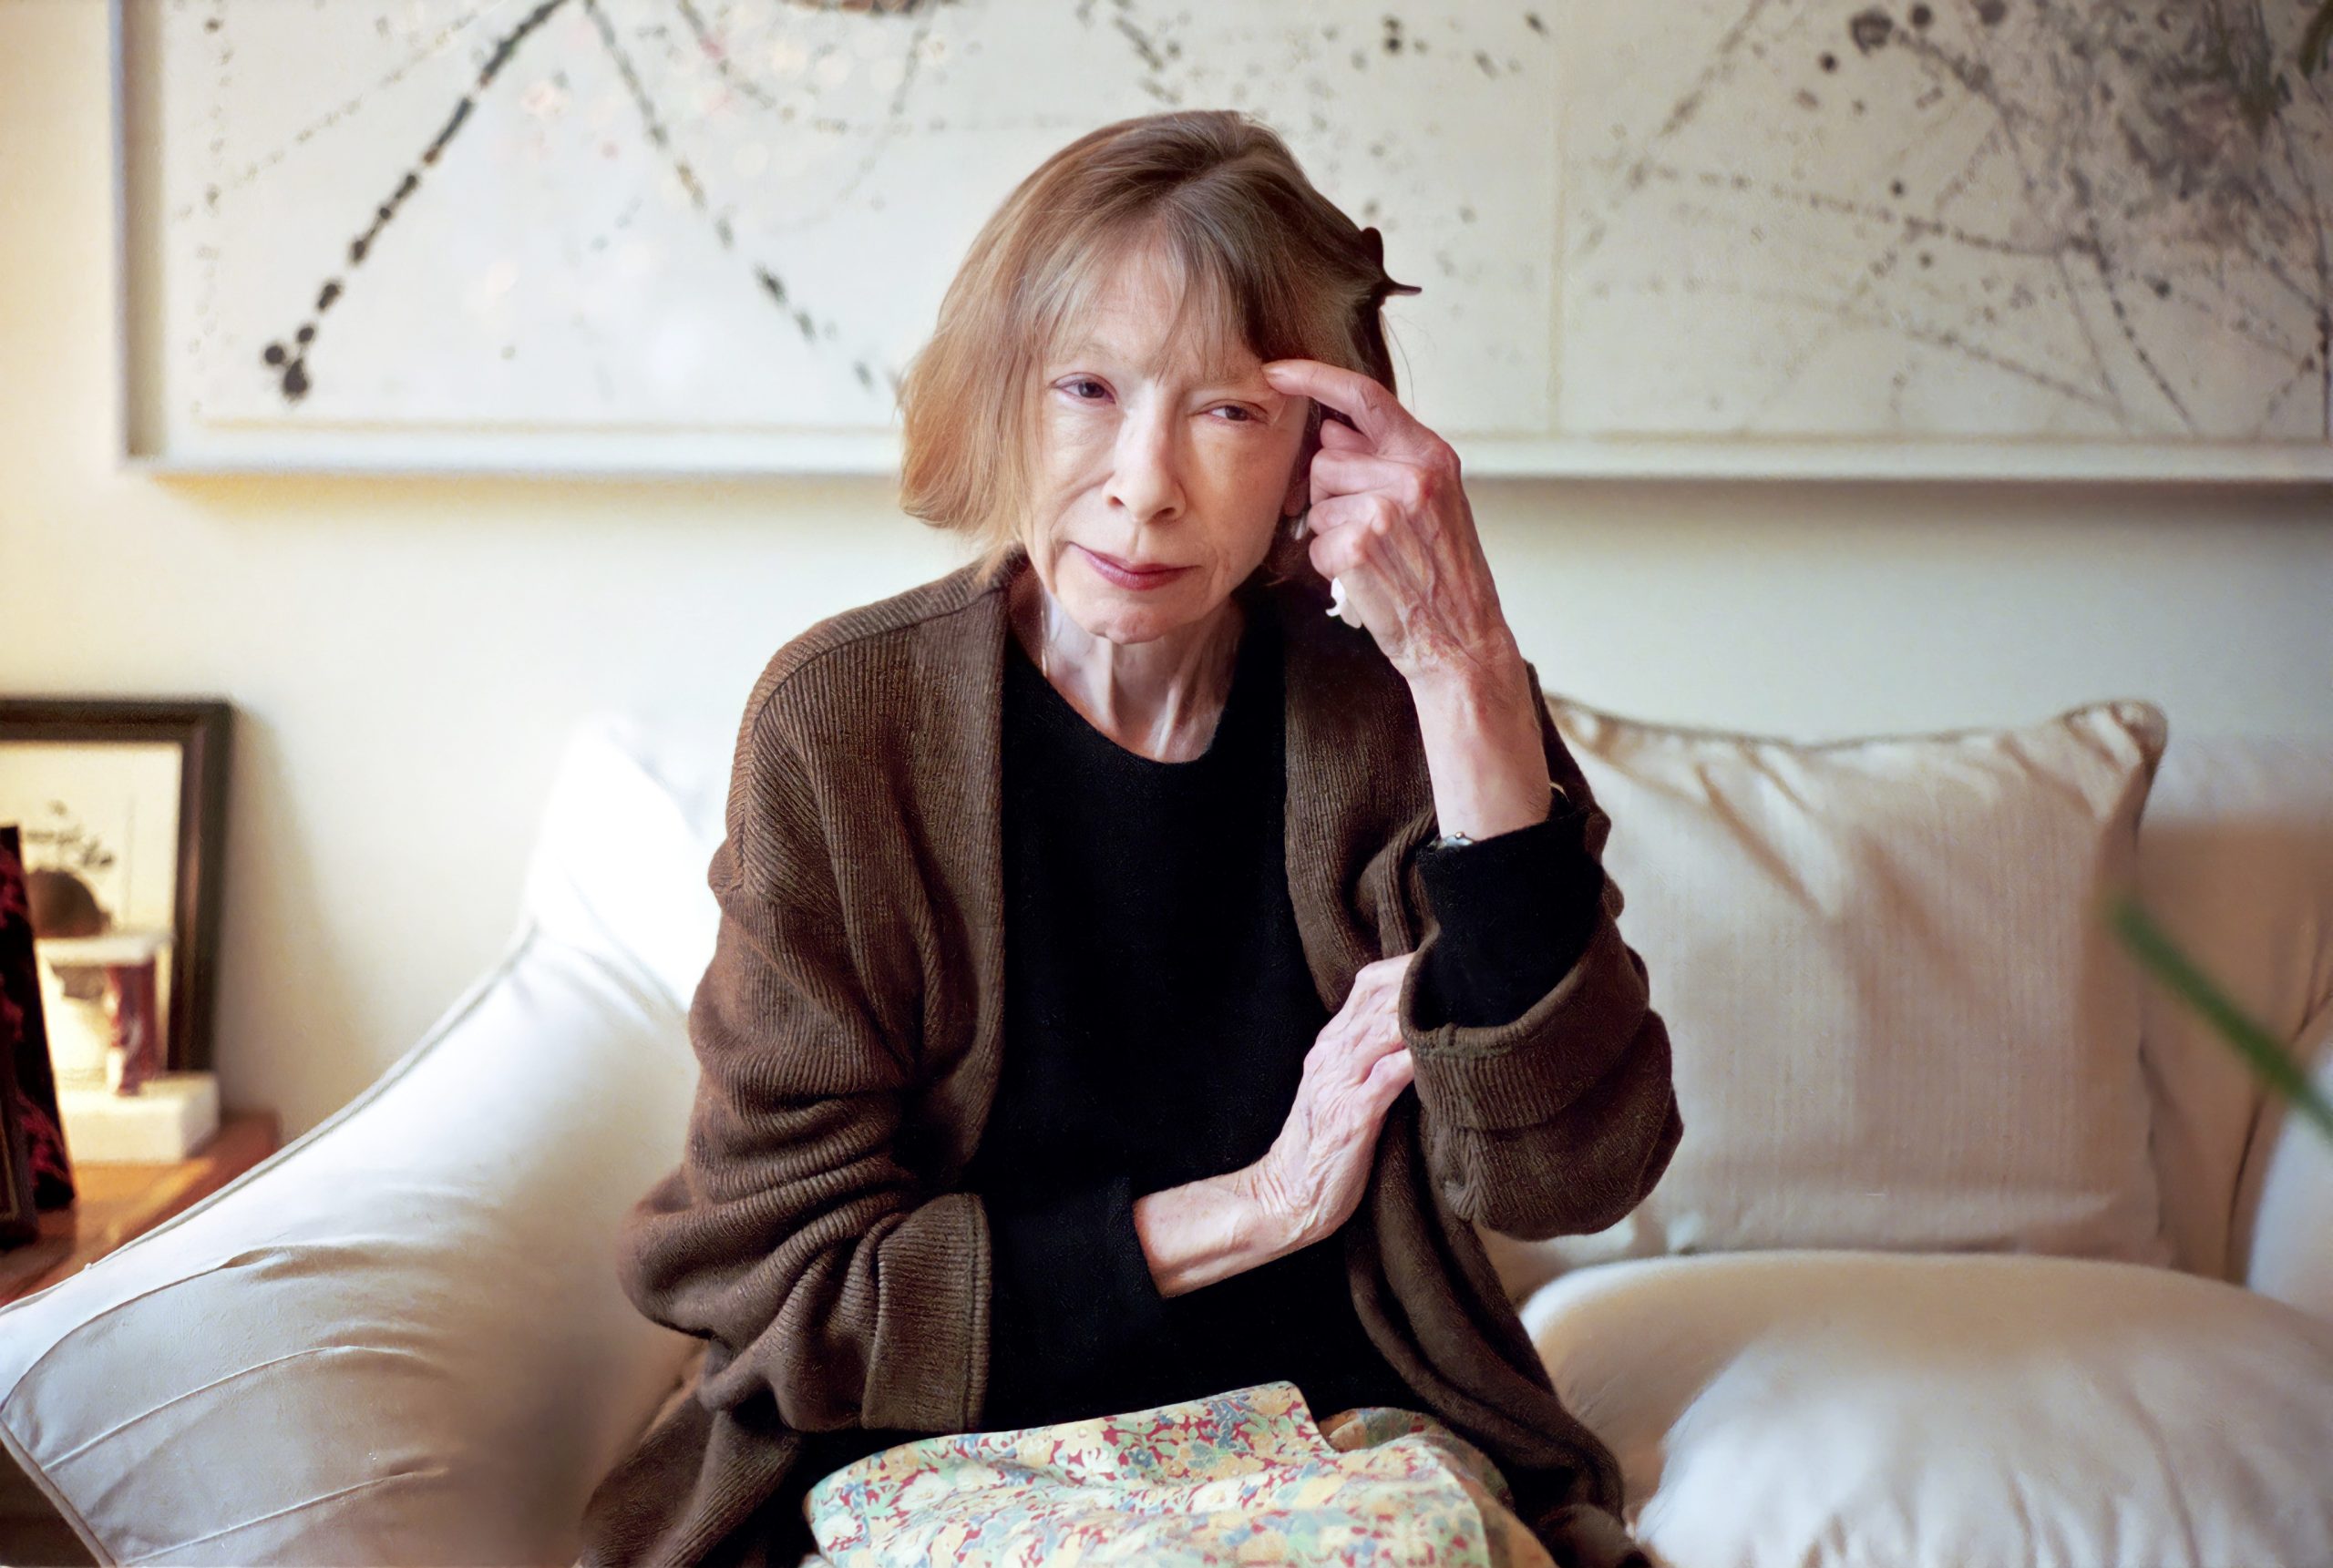 Joan Didion and the Courage to Say What You Mean